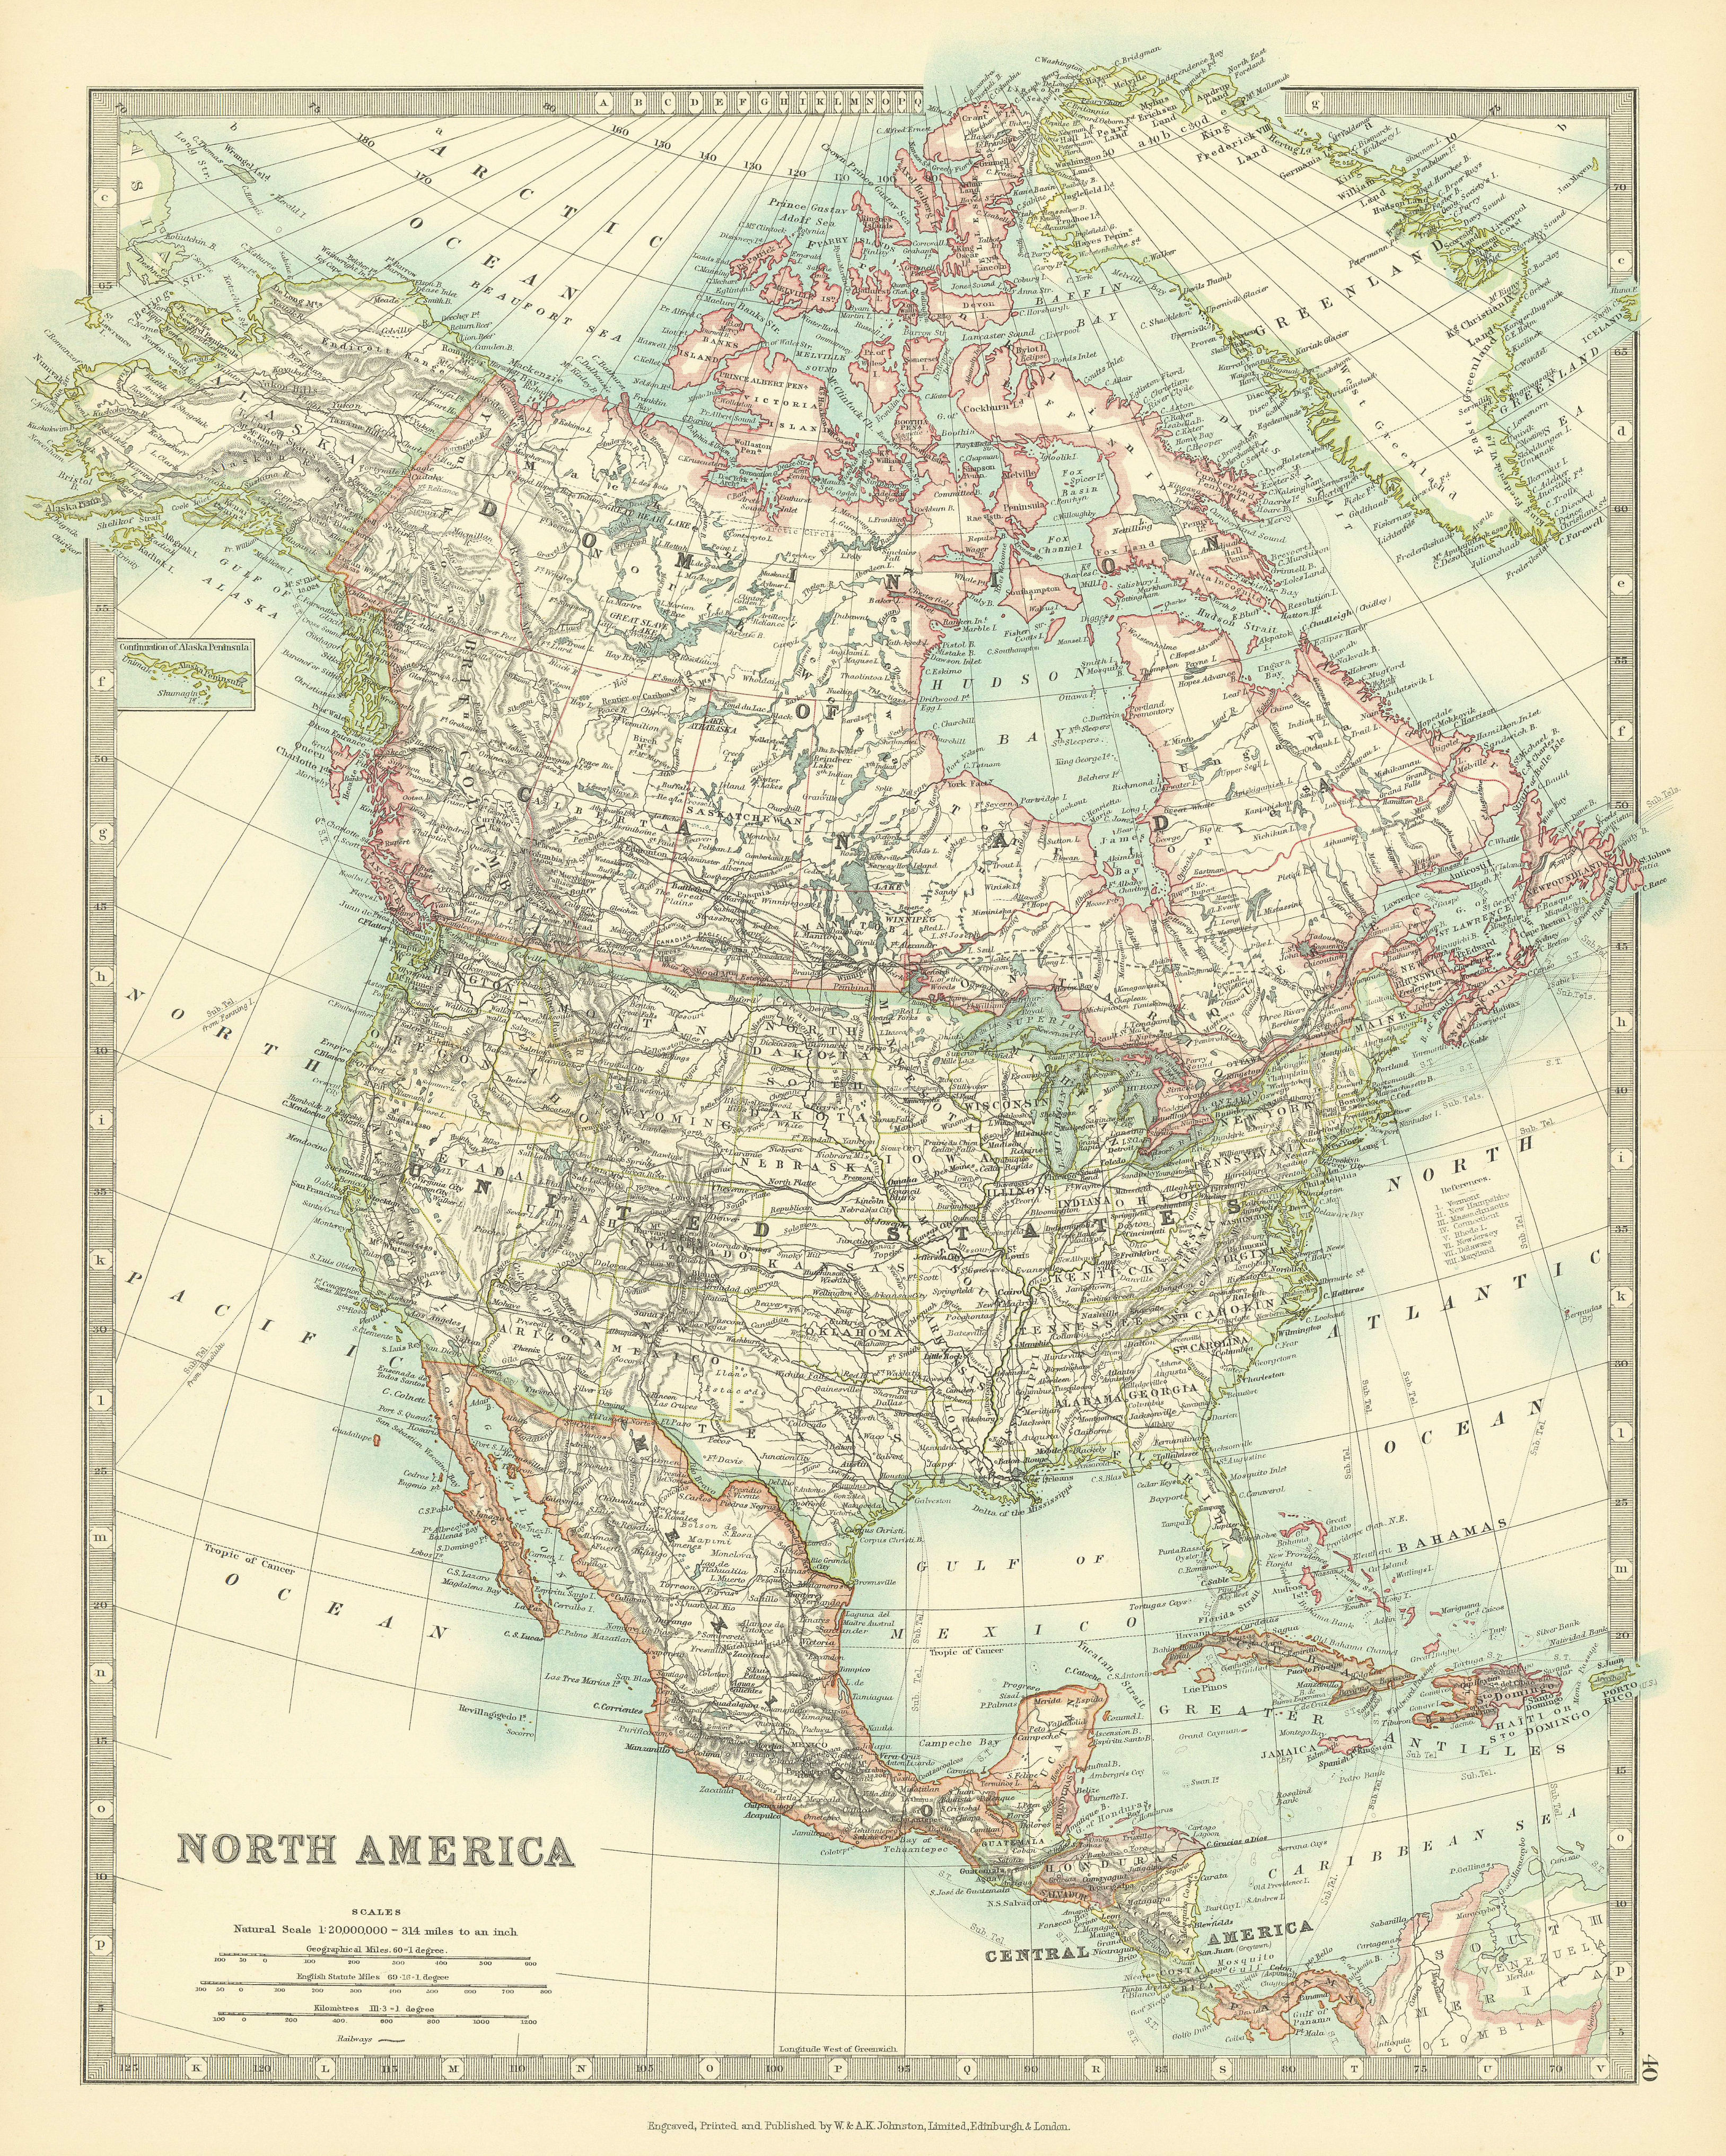 Associate Product NORTH AMERICA. United States Canada Mexico. Railways. JOHNSTON 1911 old map